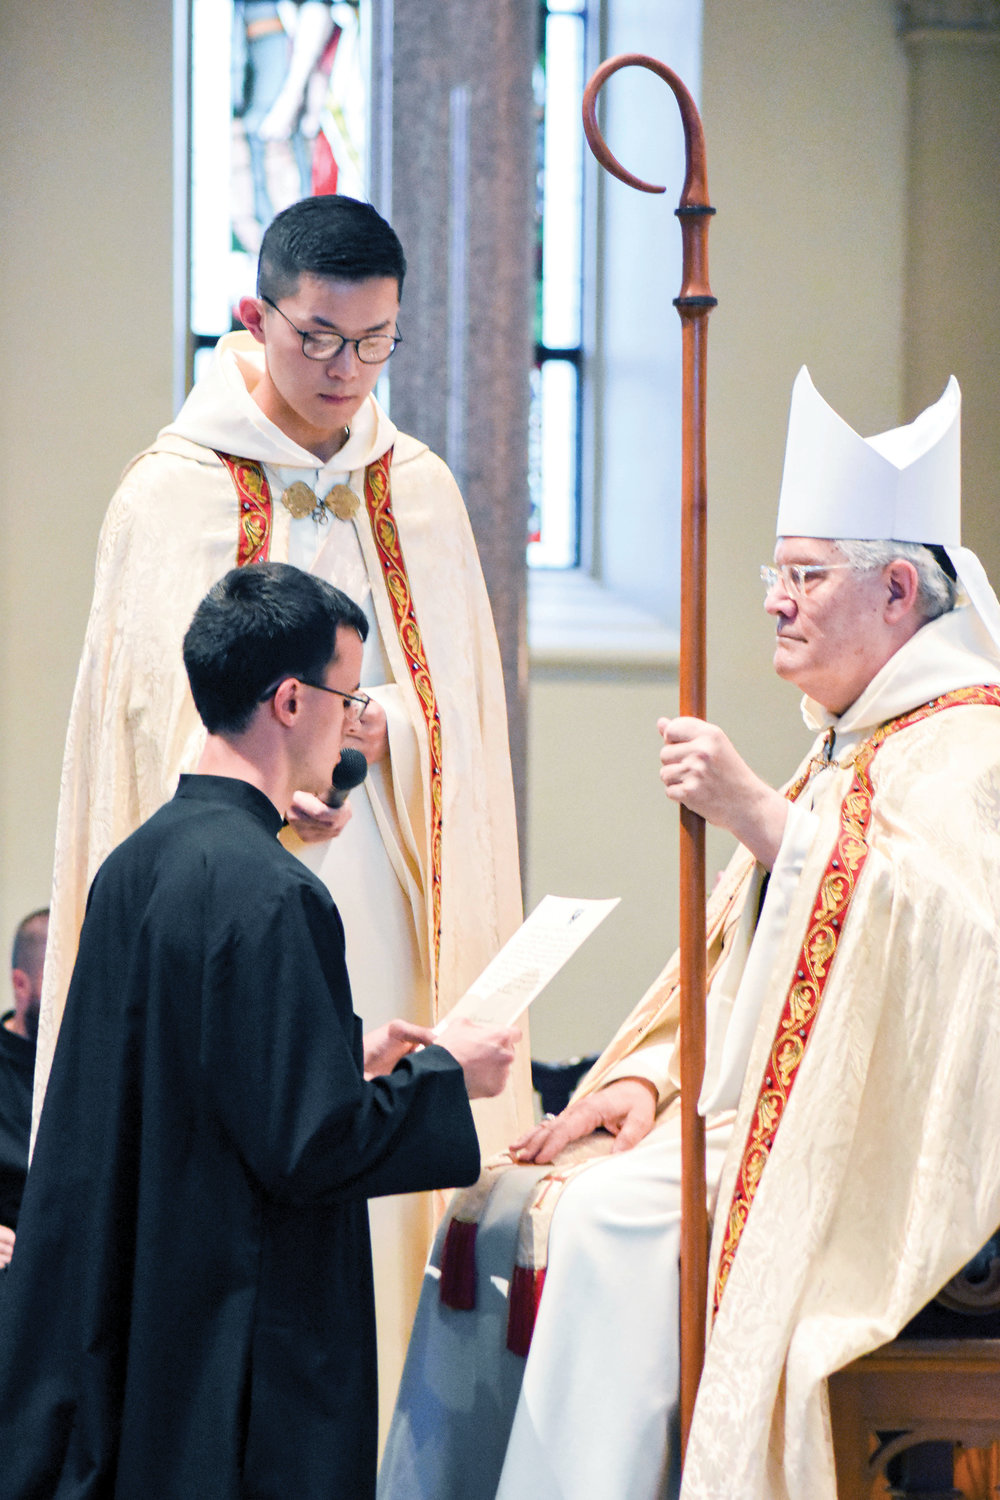 Brother Bede Maxson, O.S.B., professes first, or simple, vows before Archabbot Martin de Porres Bartel, O.S.B., at St. Vincent Archabbey in Latrobe, Pa., July 10.